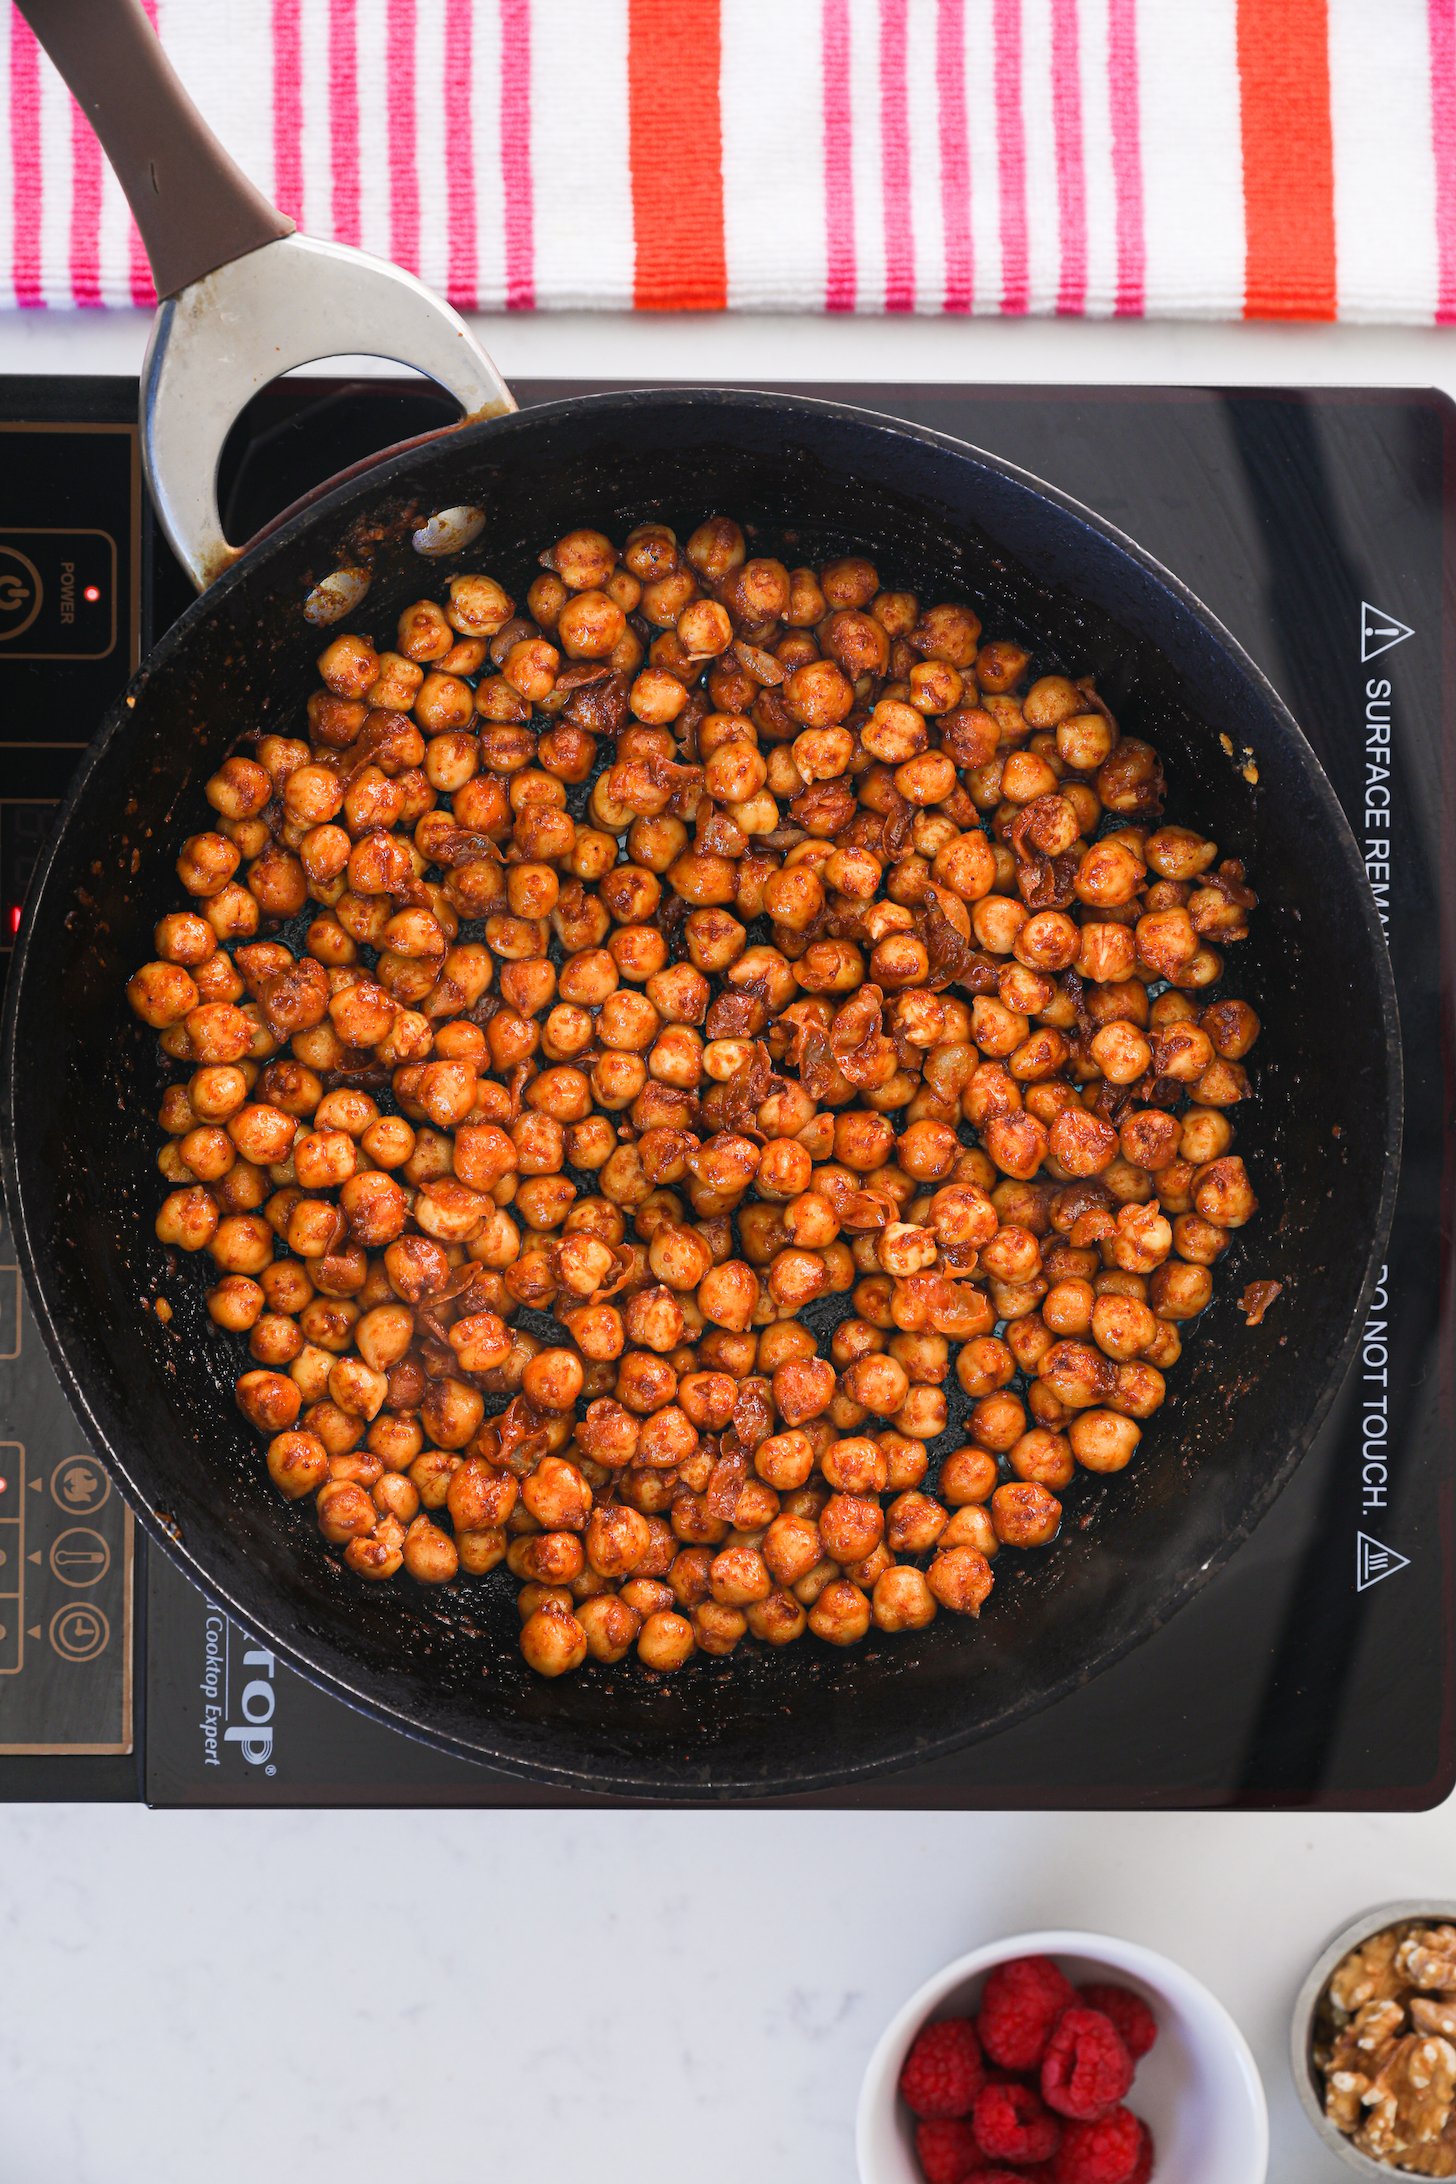 A pan of spice-coated chickpeas on a stovetop.